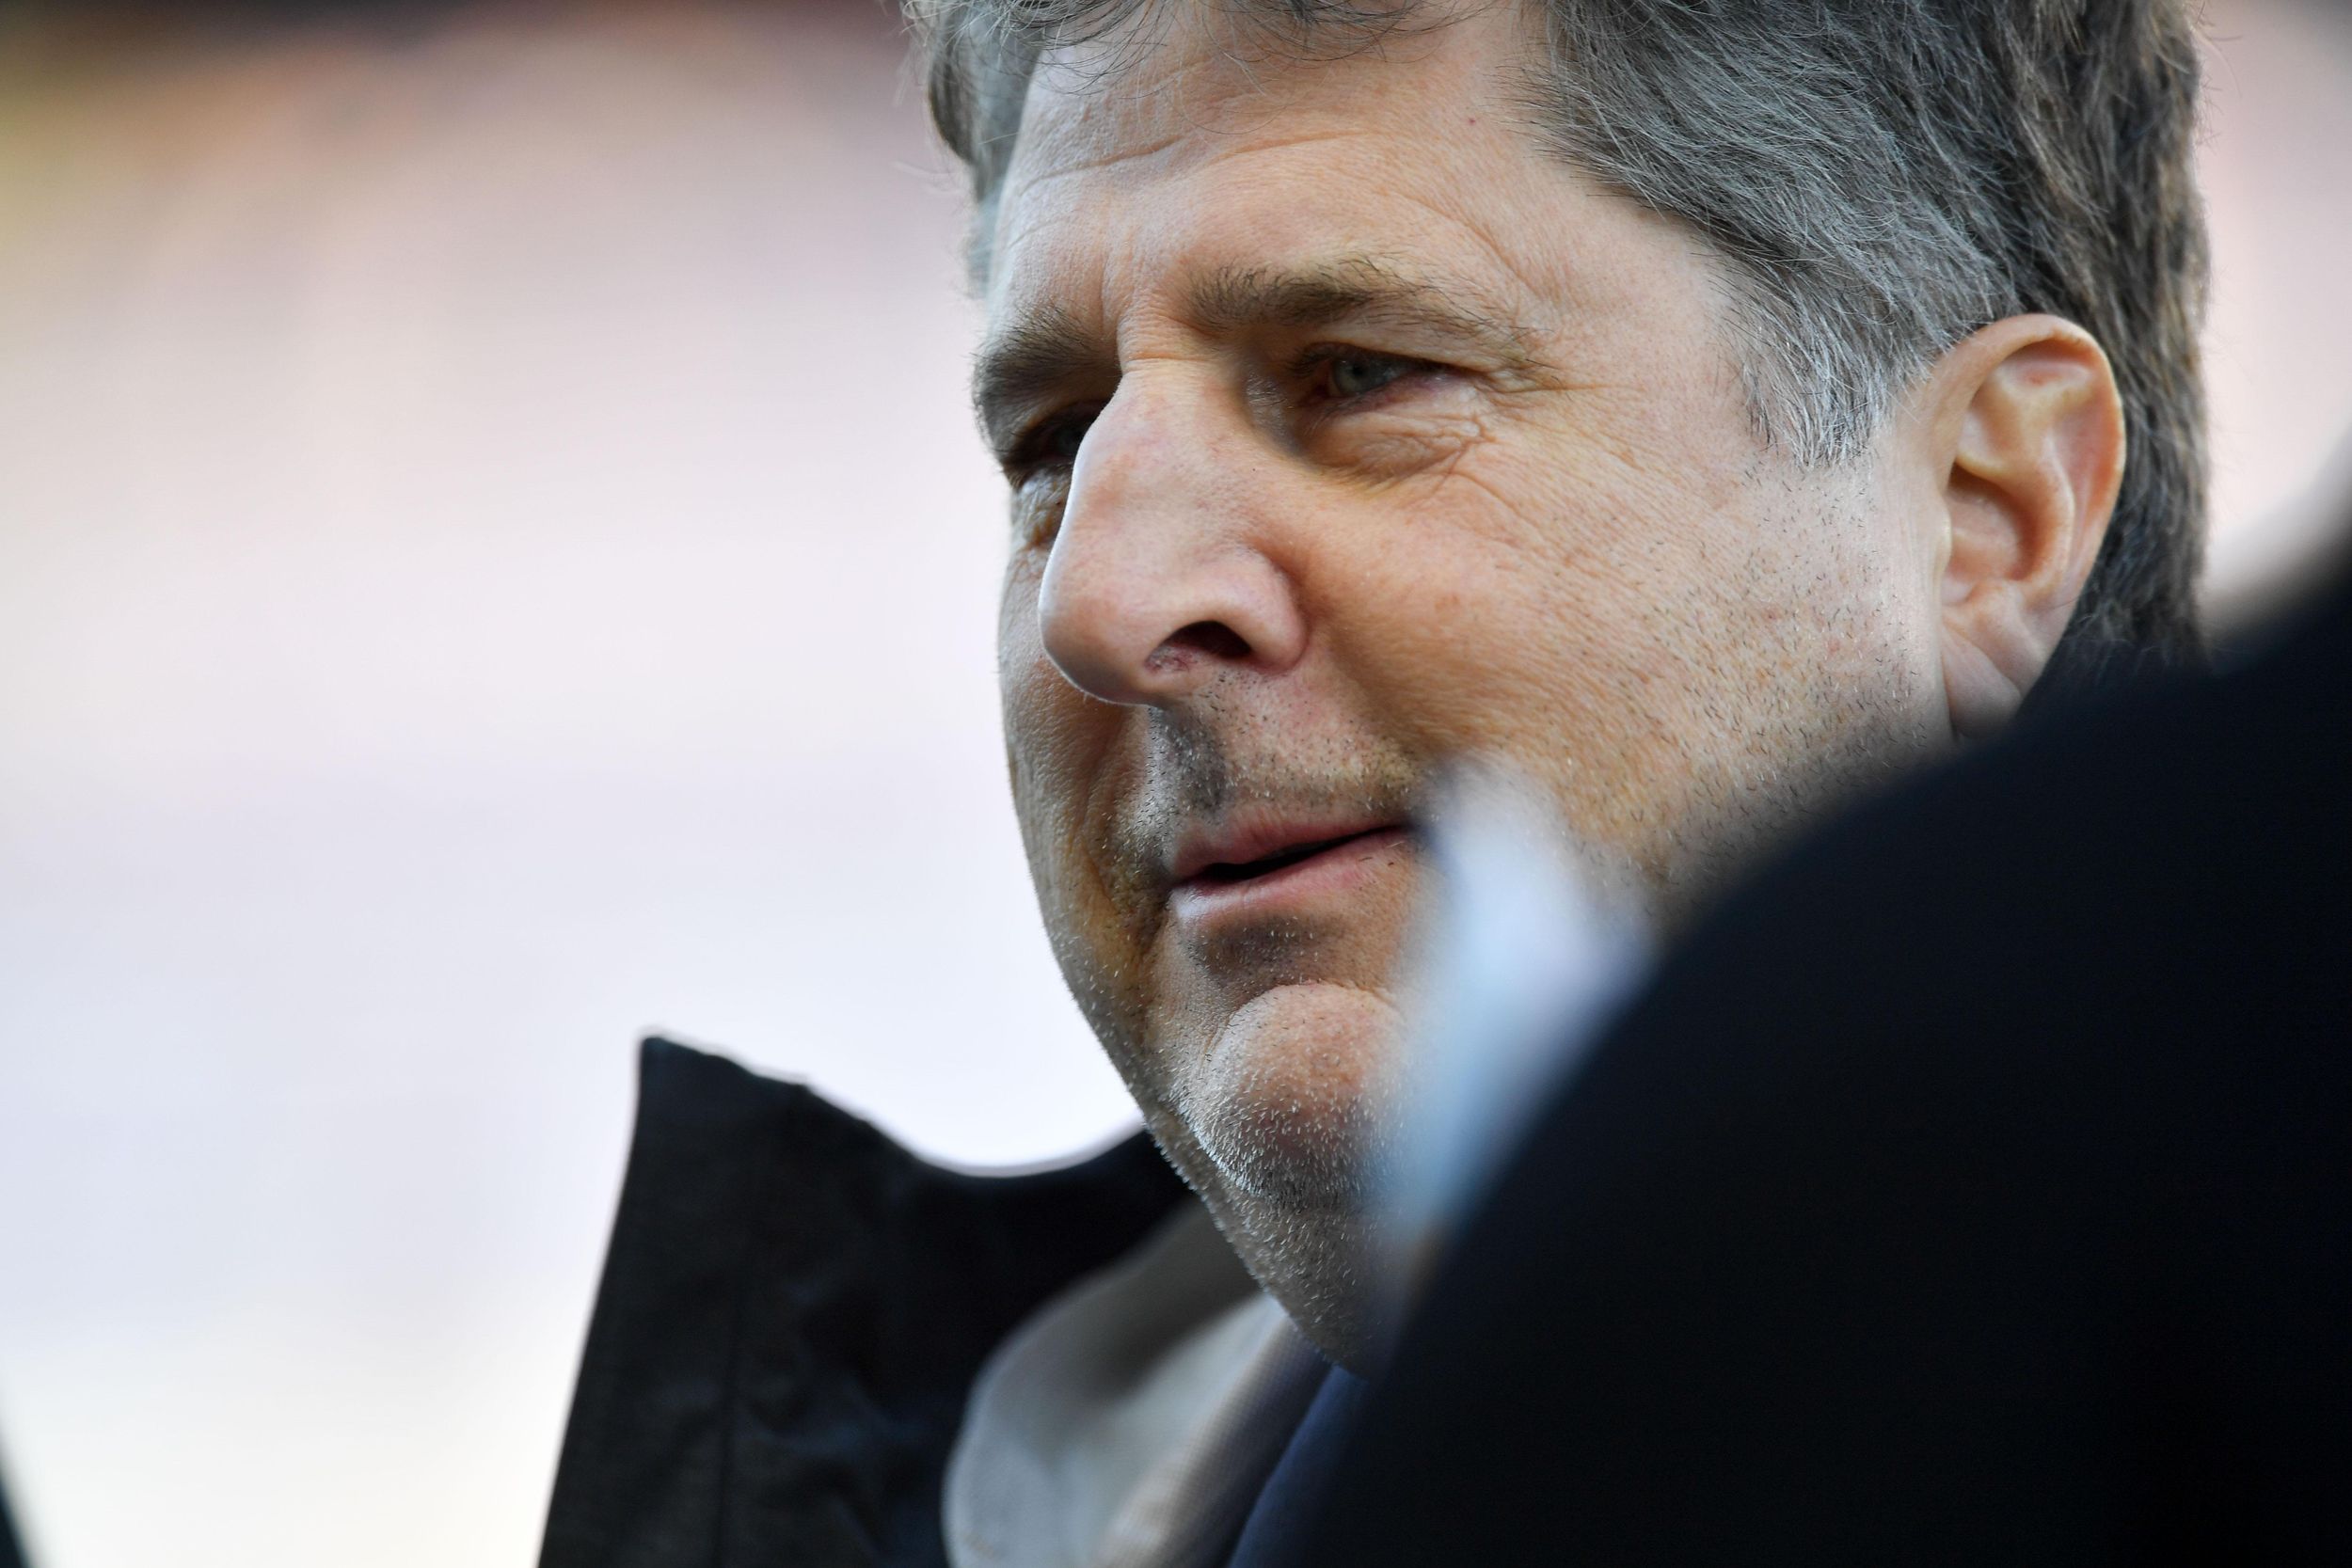 Mike Leach agrees to contract extension amid rumors, keeping Washington